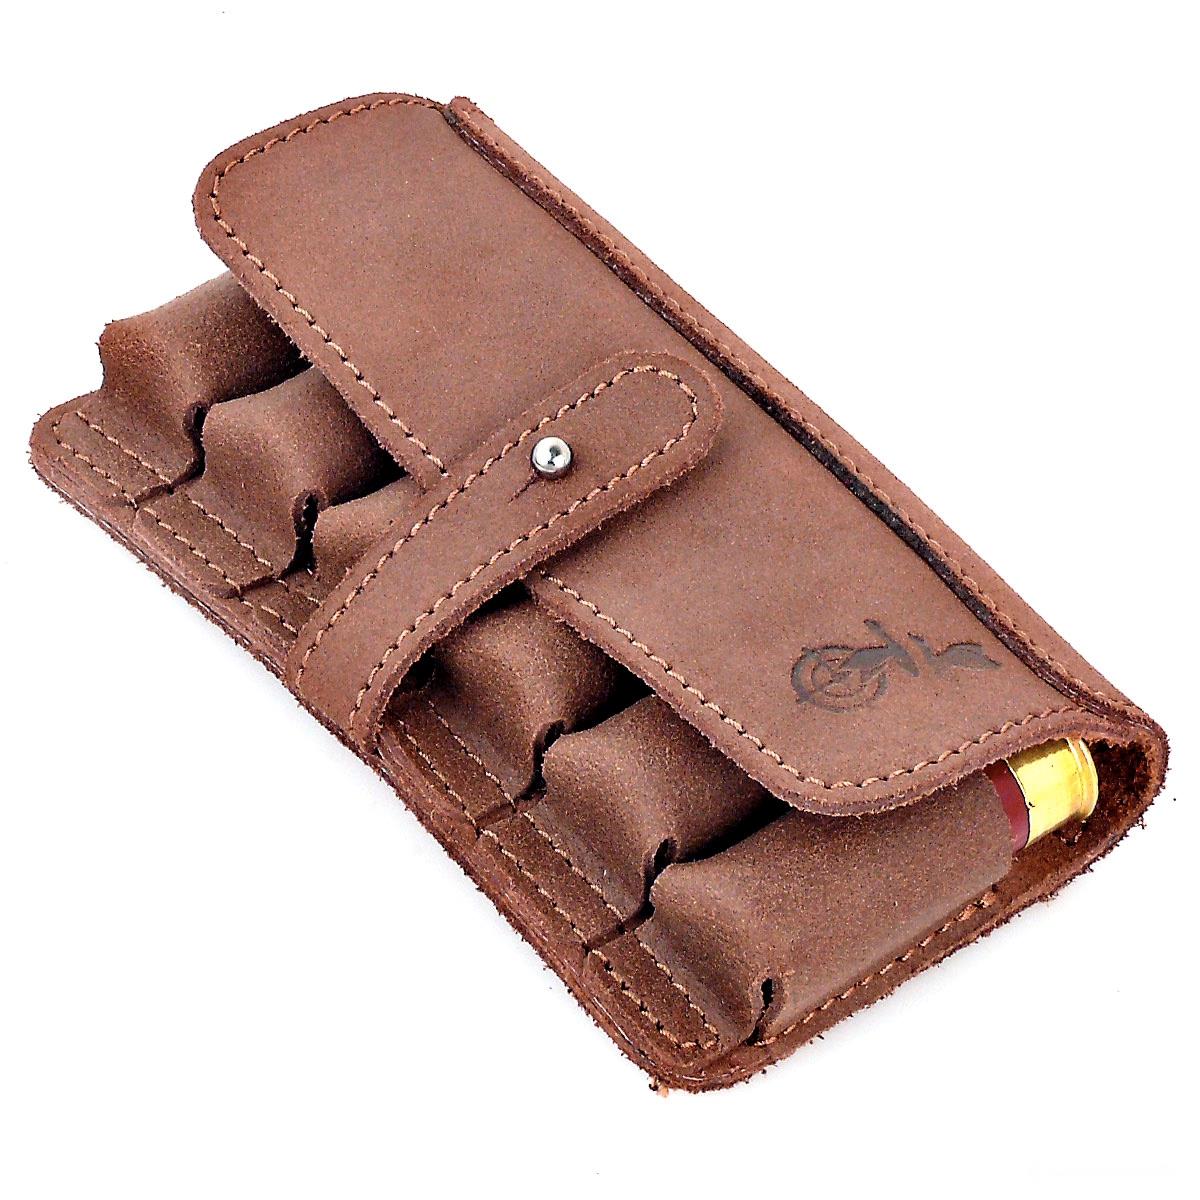 New 100%Leather Rifle Cartridge Holder Pouch Belt Ammo 8 Shells.Made in Europe. 